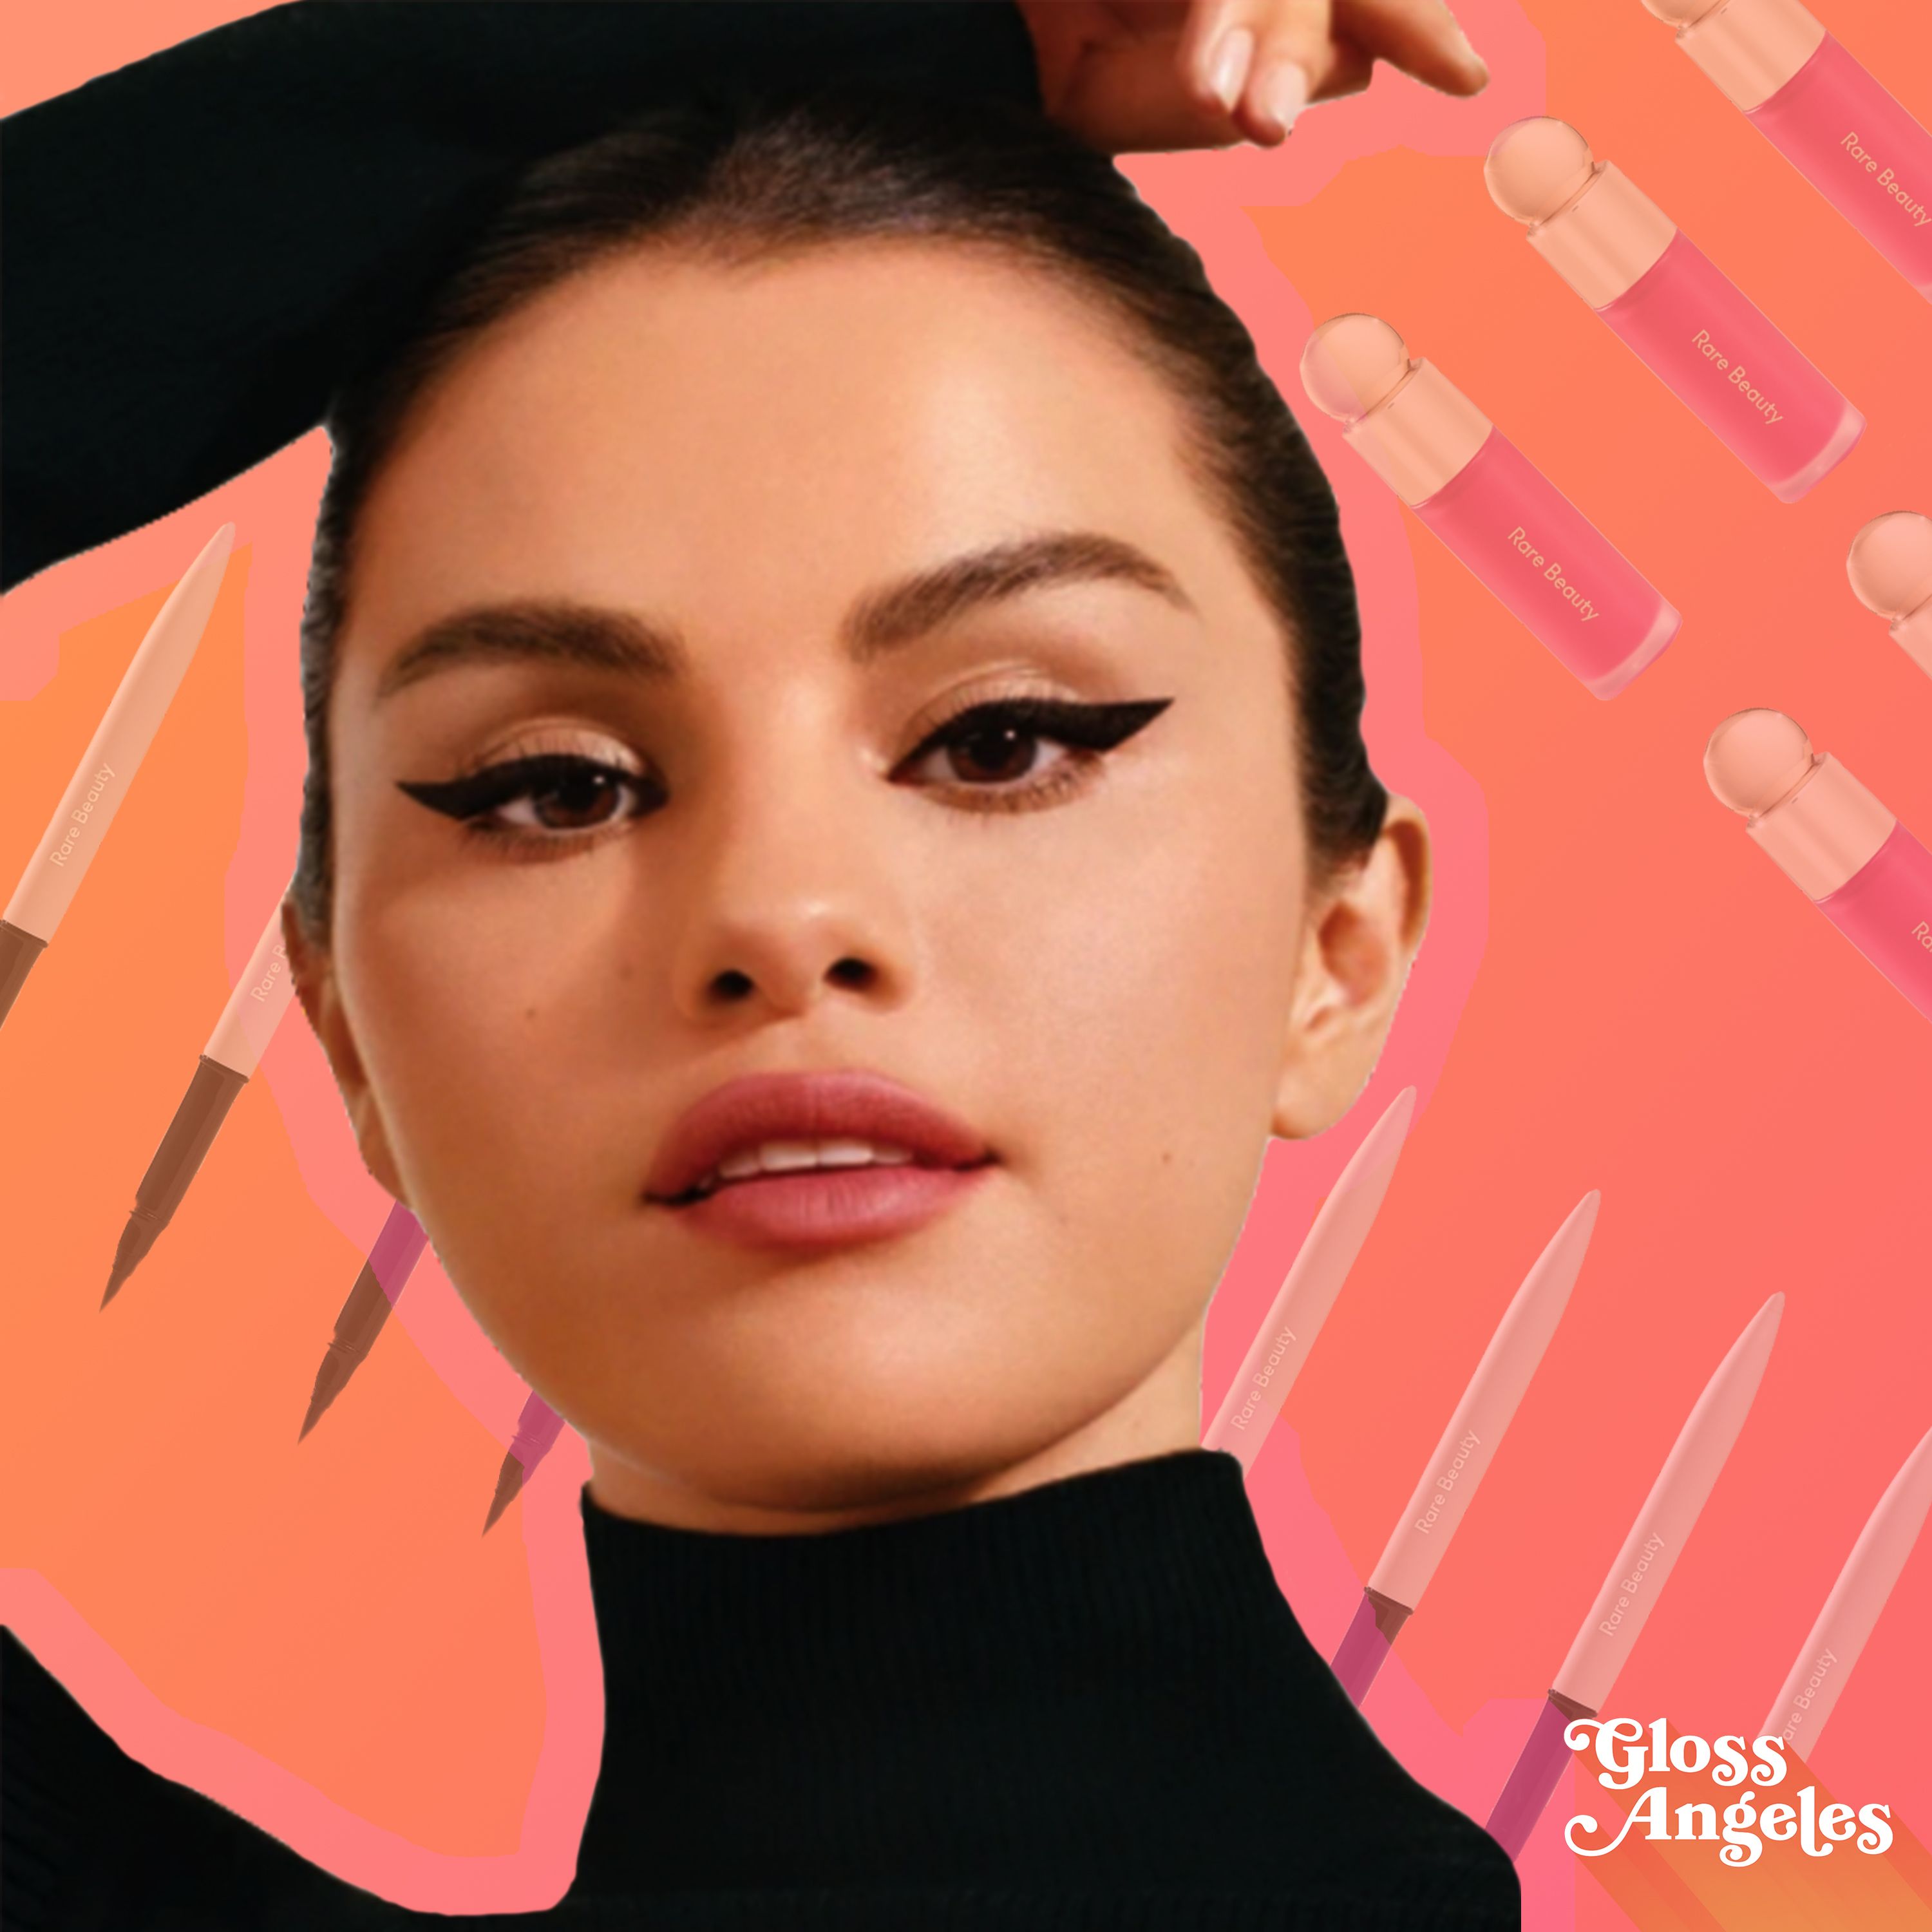 Our Interview With Selena Gomez: How the Entertainment Industry Affected Her Self-Confidence, Where She's At Now, and What Void Rare Beauty Fills in the Industry